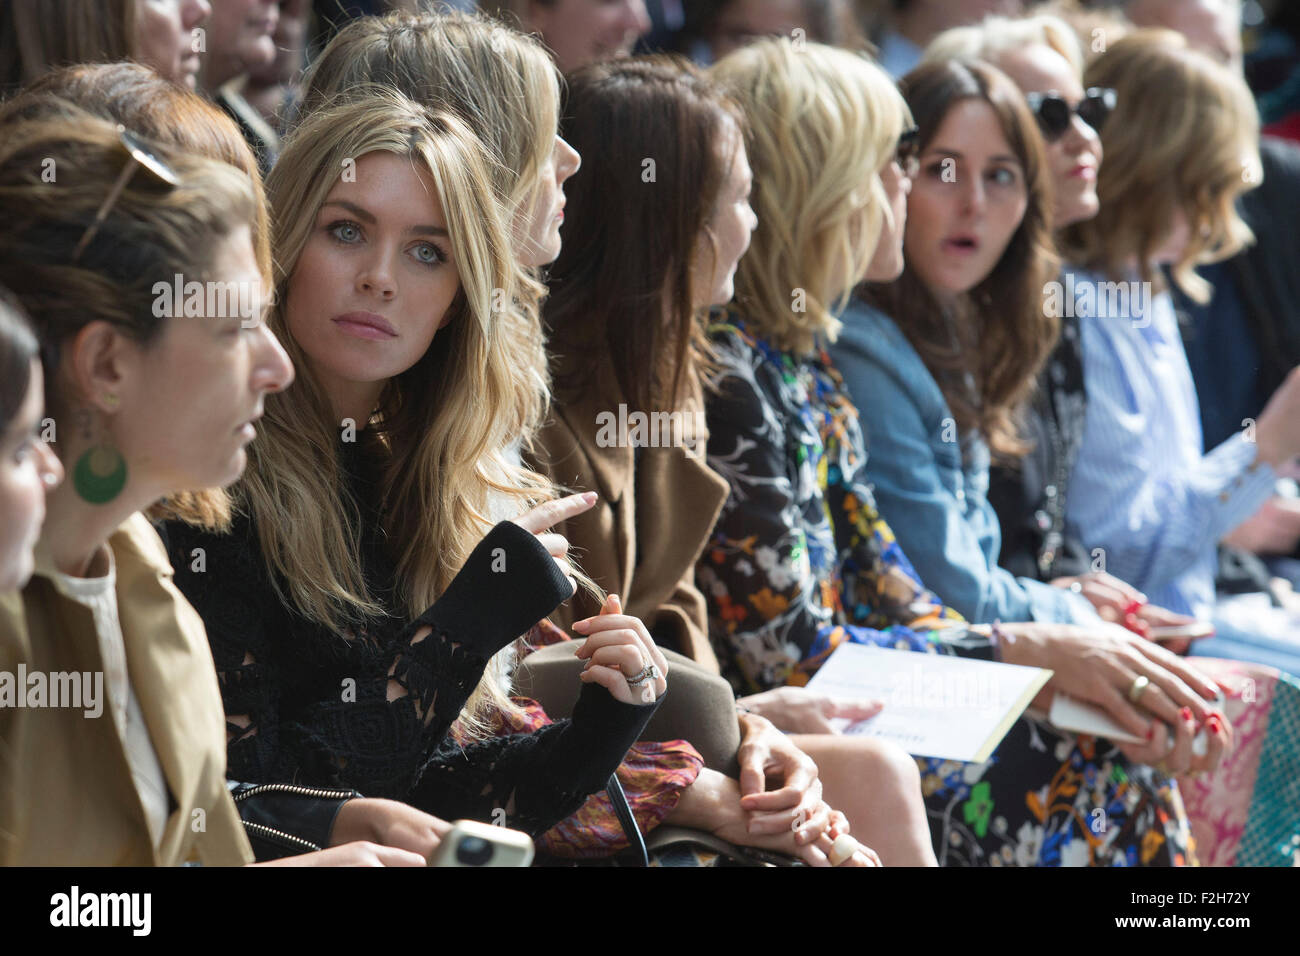 London, UK. 19th September, 2015. Model Abbey Clancy attends the Sibling fashion show at London Fashion Week. Credit:  Vibrant Pictures/Alamy Live News Stock Photo